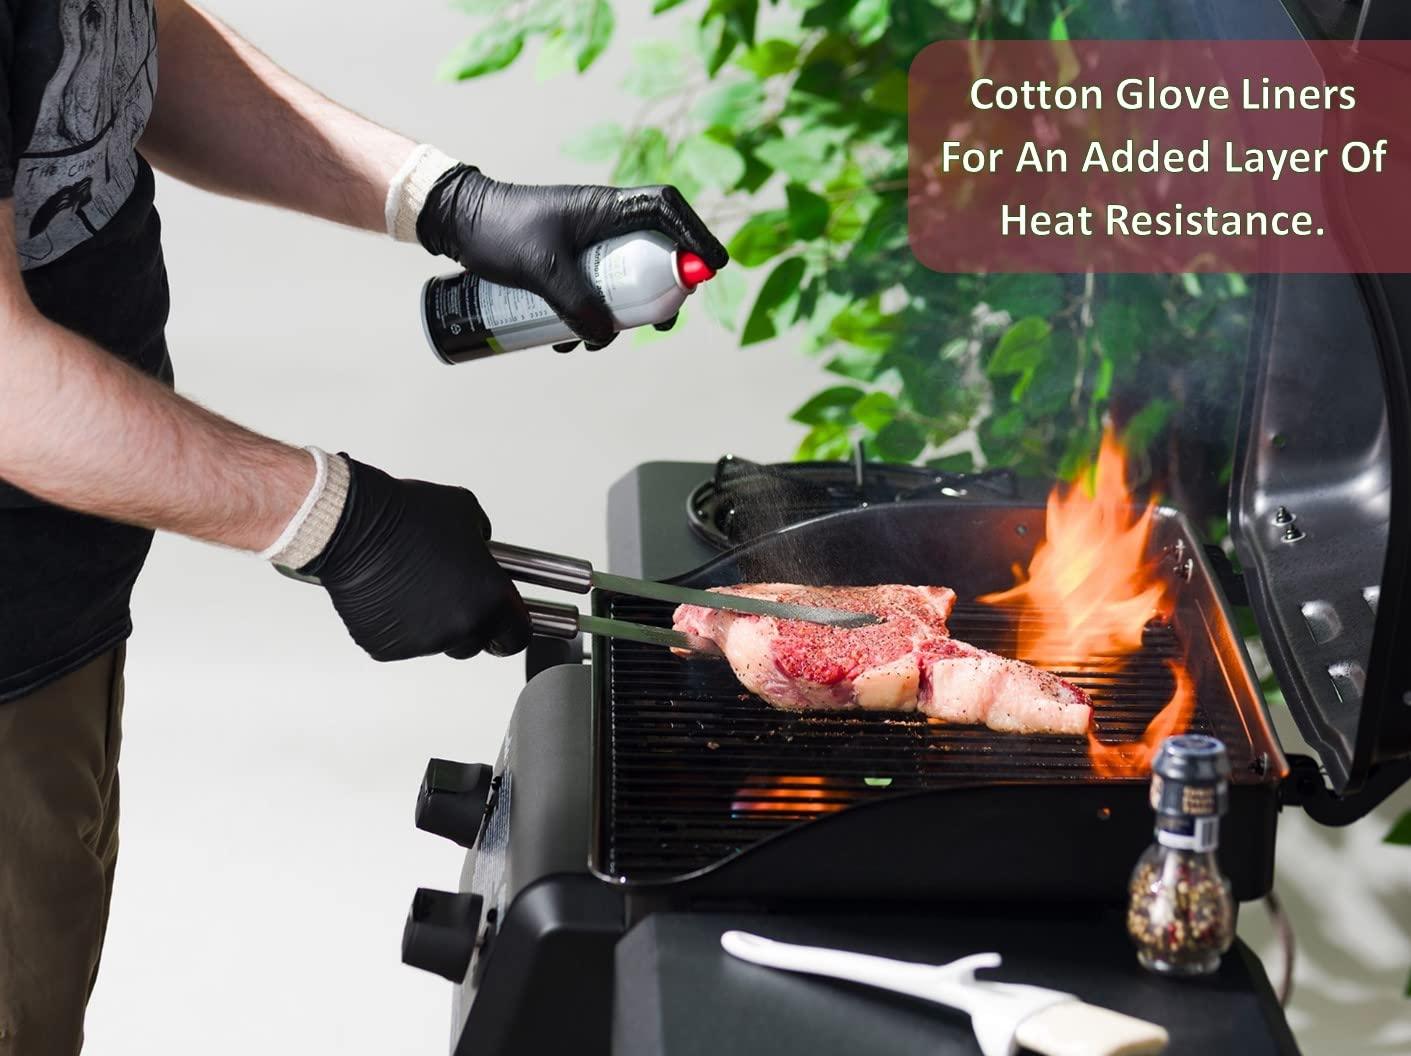 Nechtik BBQ Gloves disposable - 4 Cotton Glove Liners and 100 Disposable Gloves - Machine Washable Cotton Liners - Powder Free, Latex Free Black Nitrile Gloves (100, XL) - CookCave